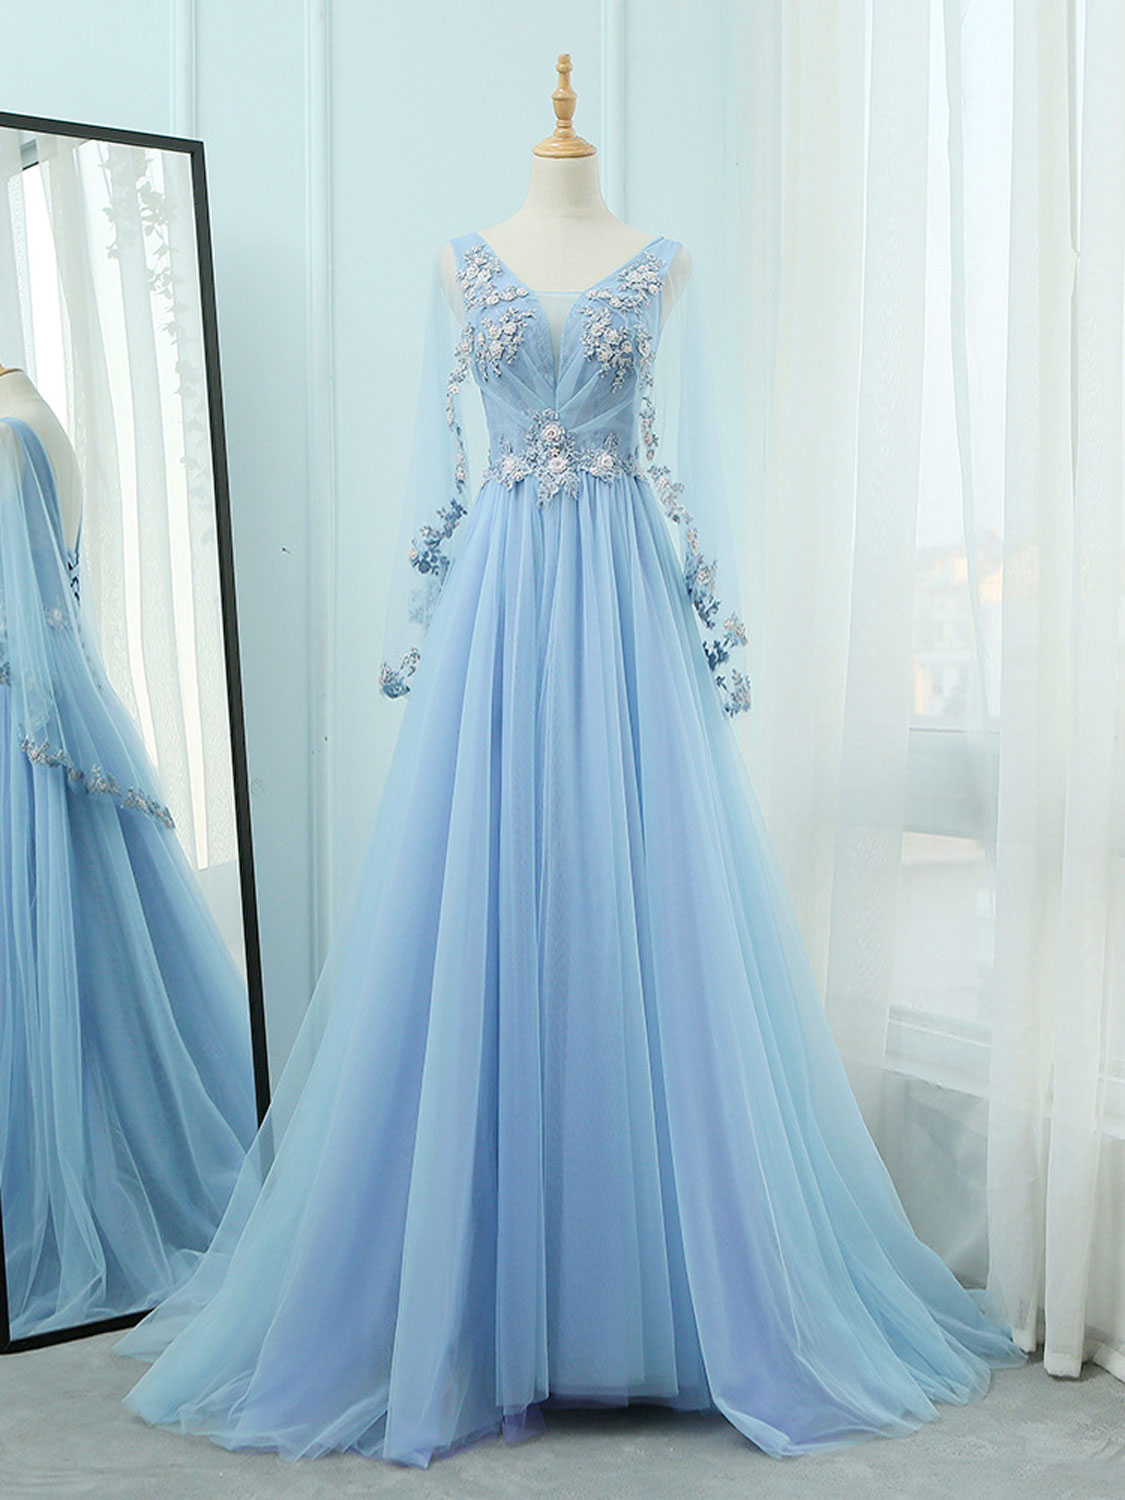 Sky Blue V Neck A-line Long Prom Dress with Long Sleeves - DollyGown